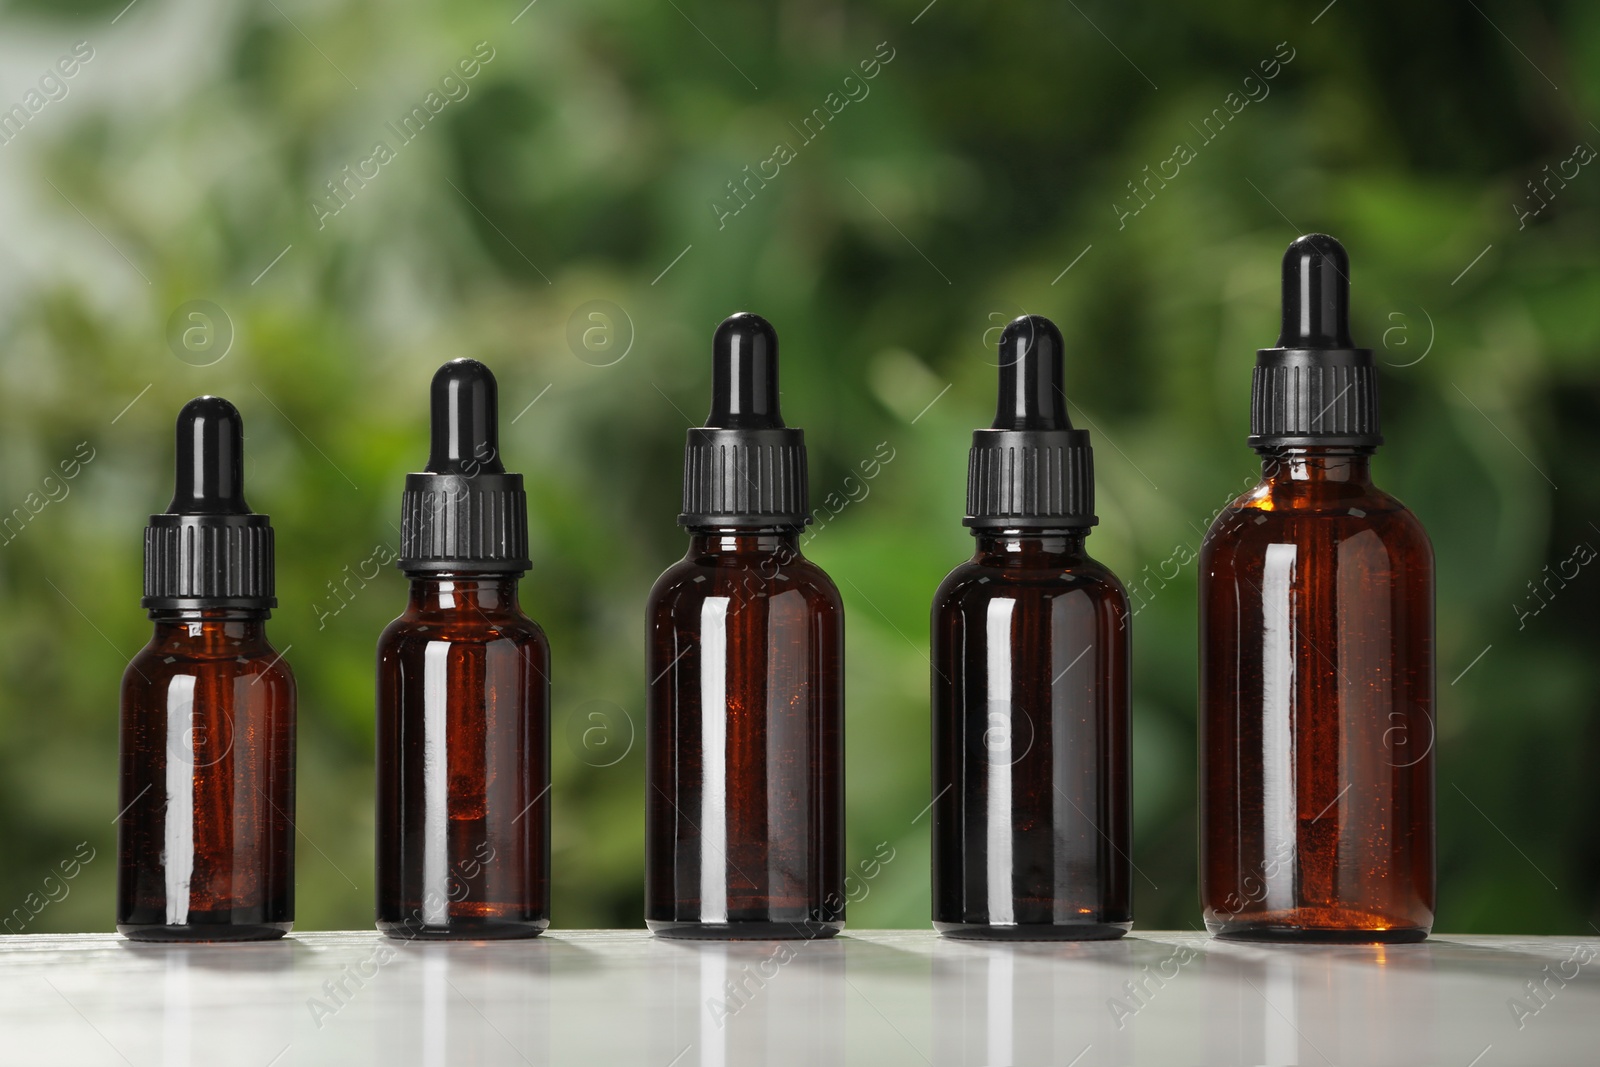 Photo of Glass bottles on white table against blurred green background